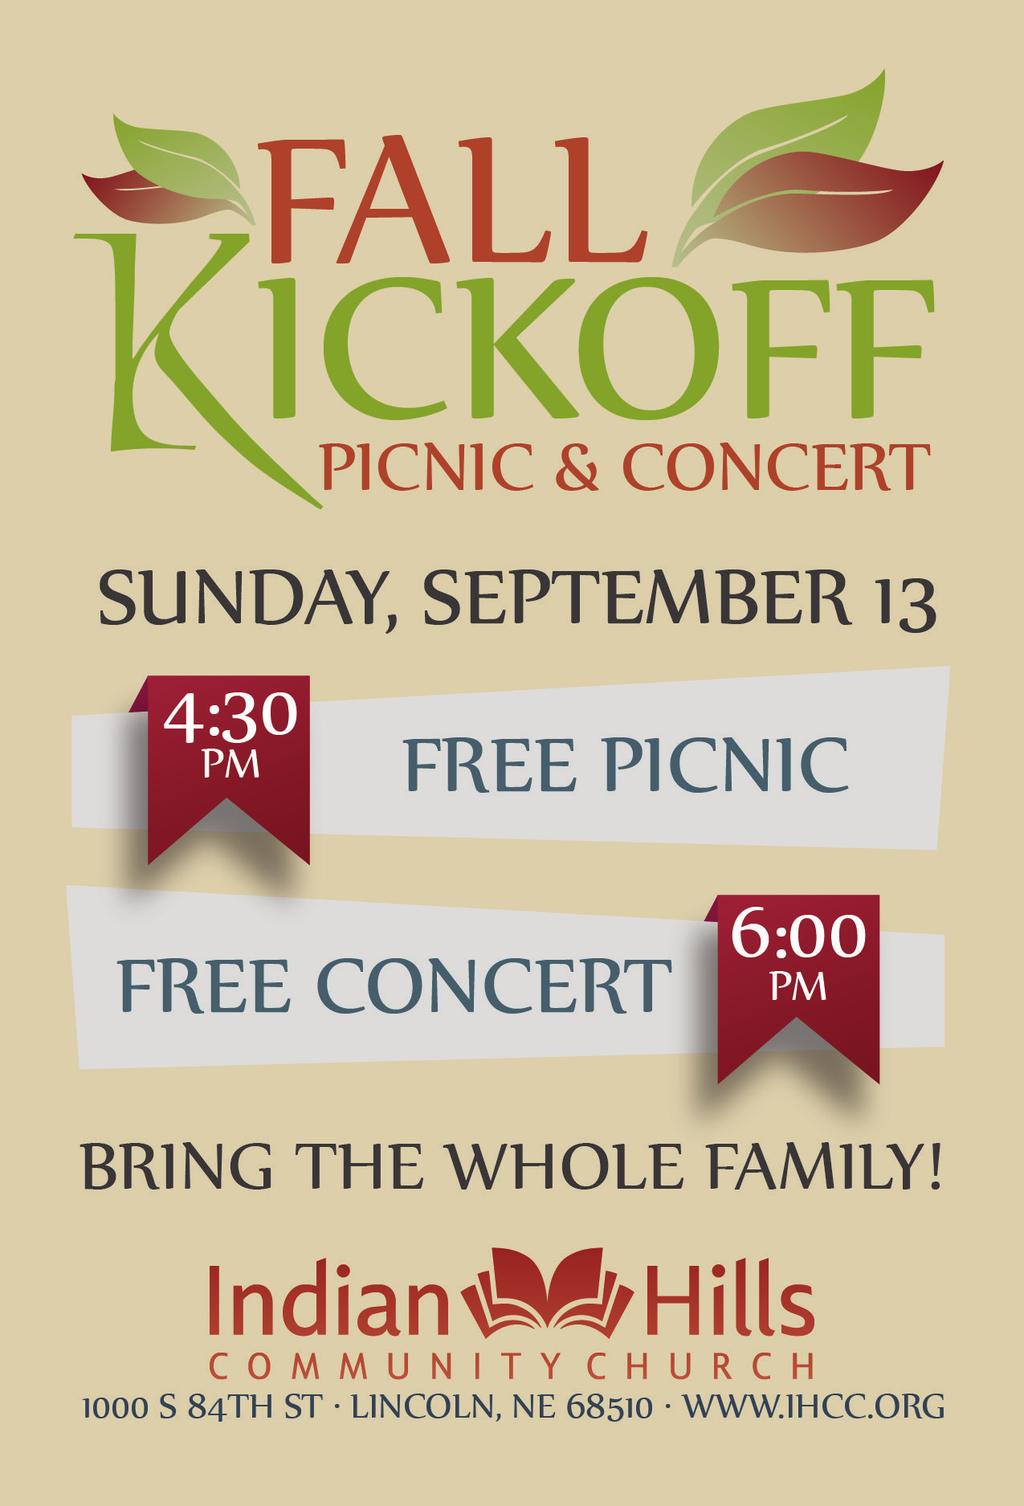 Interpreted for the Deaf Make plans to attend the 2015 Fall Kickoff Picnic & Concert on Sunday, September 13.